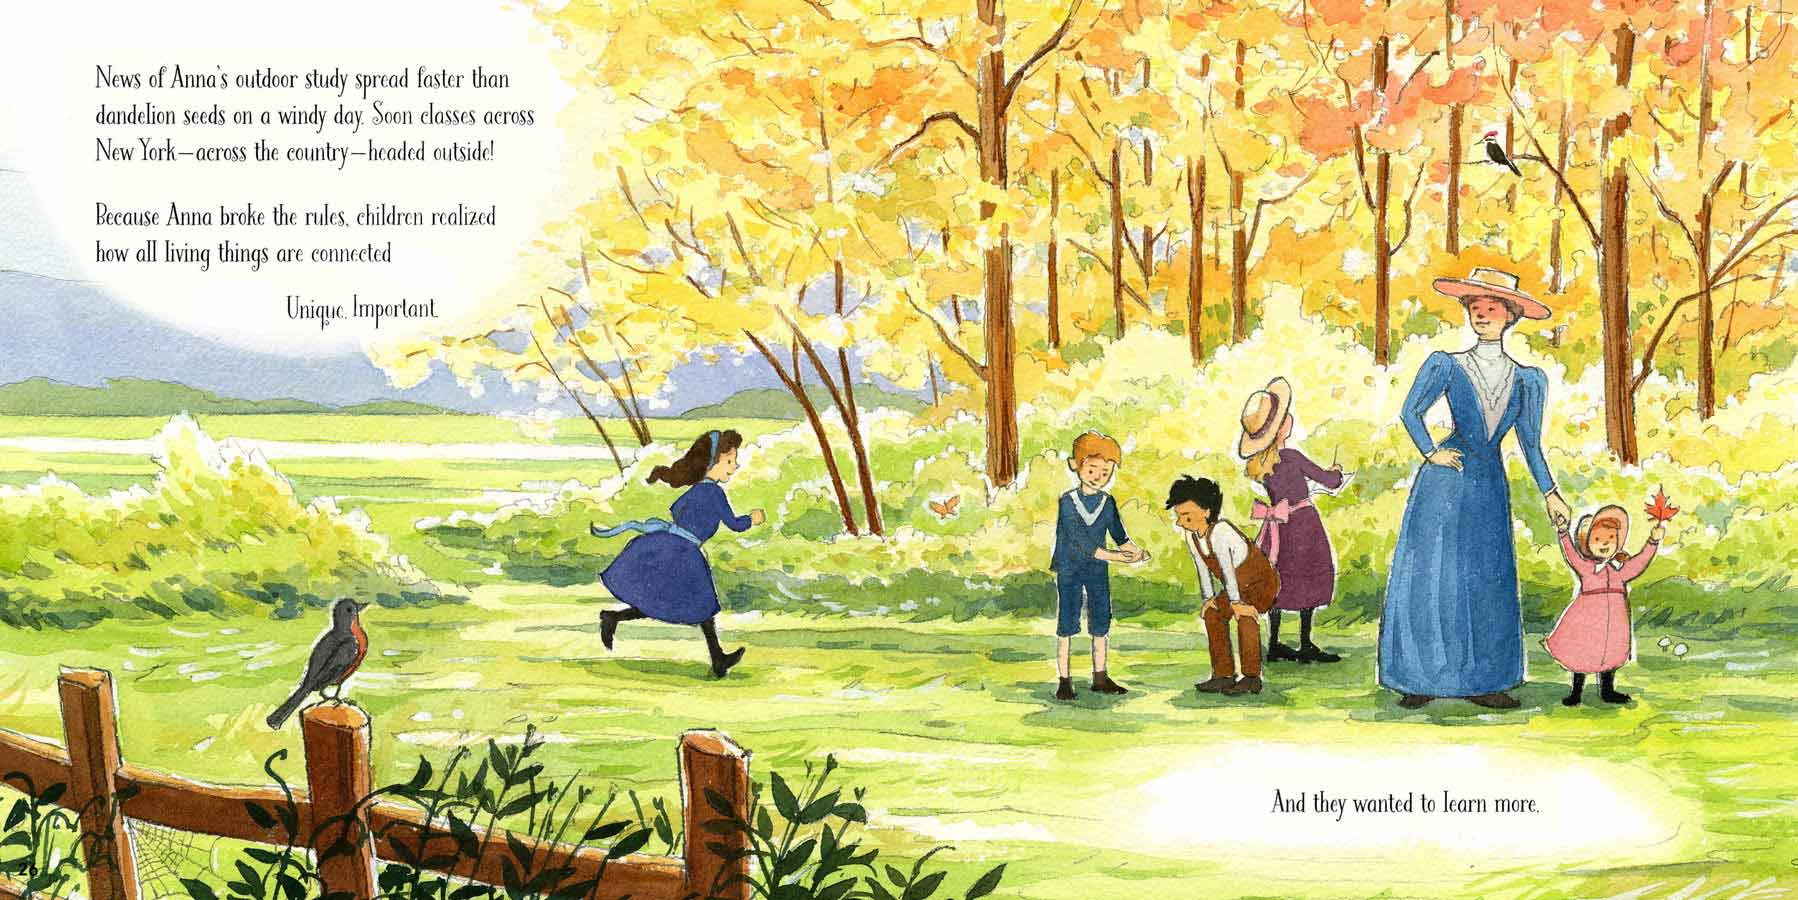 Watercolor illustration from 'Out of School and Into Nature' of a group of children and Anna Comstock looking at nature in a sunny field in autumn.